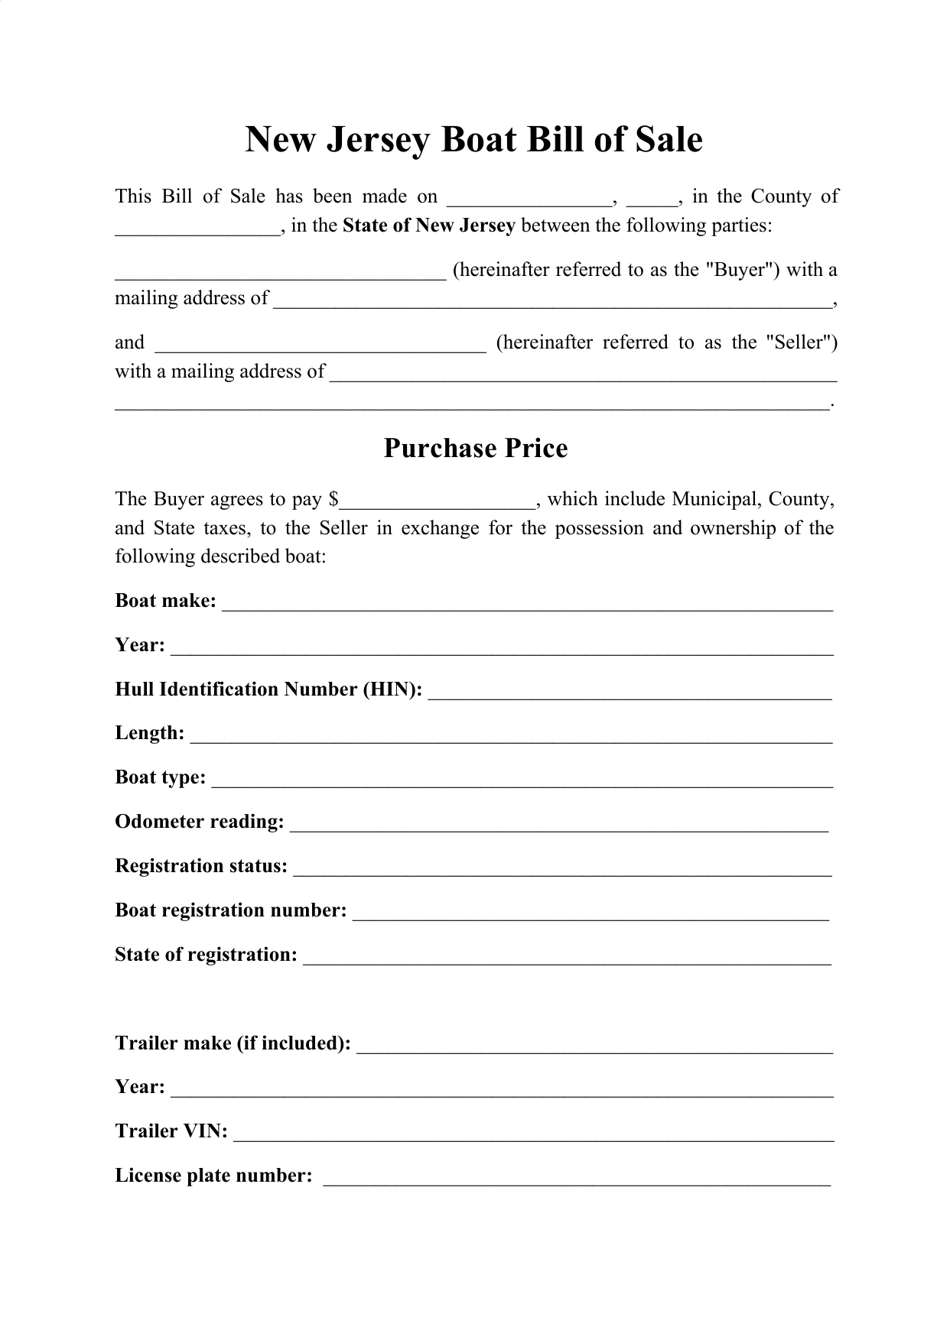 New Jersey Boat Bill of Sale Form Fill Out, Sign Online and Download